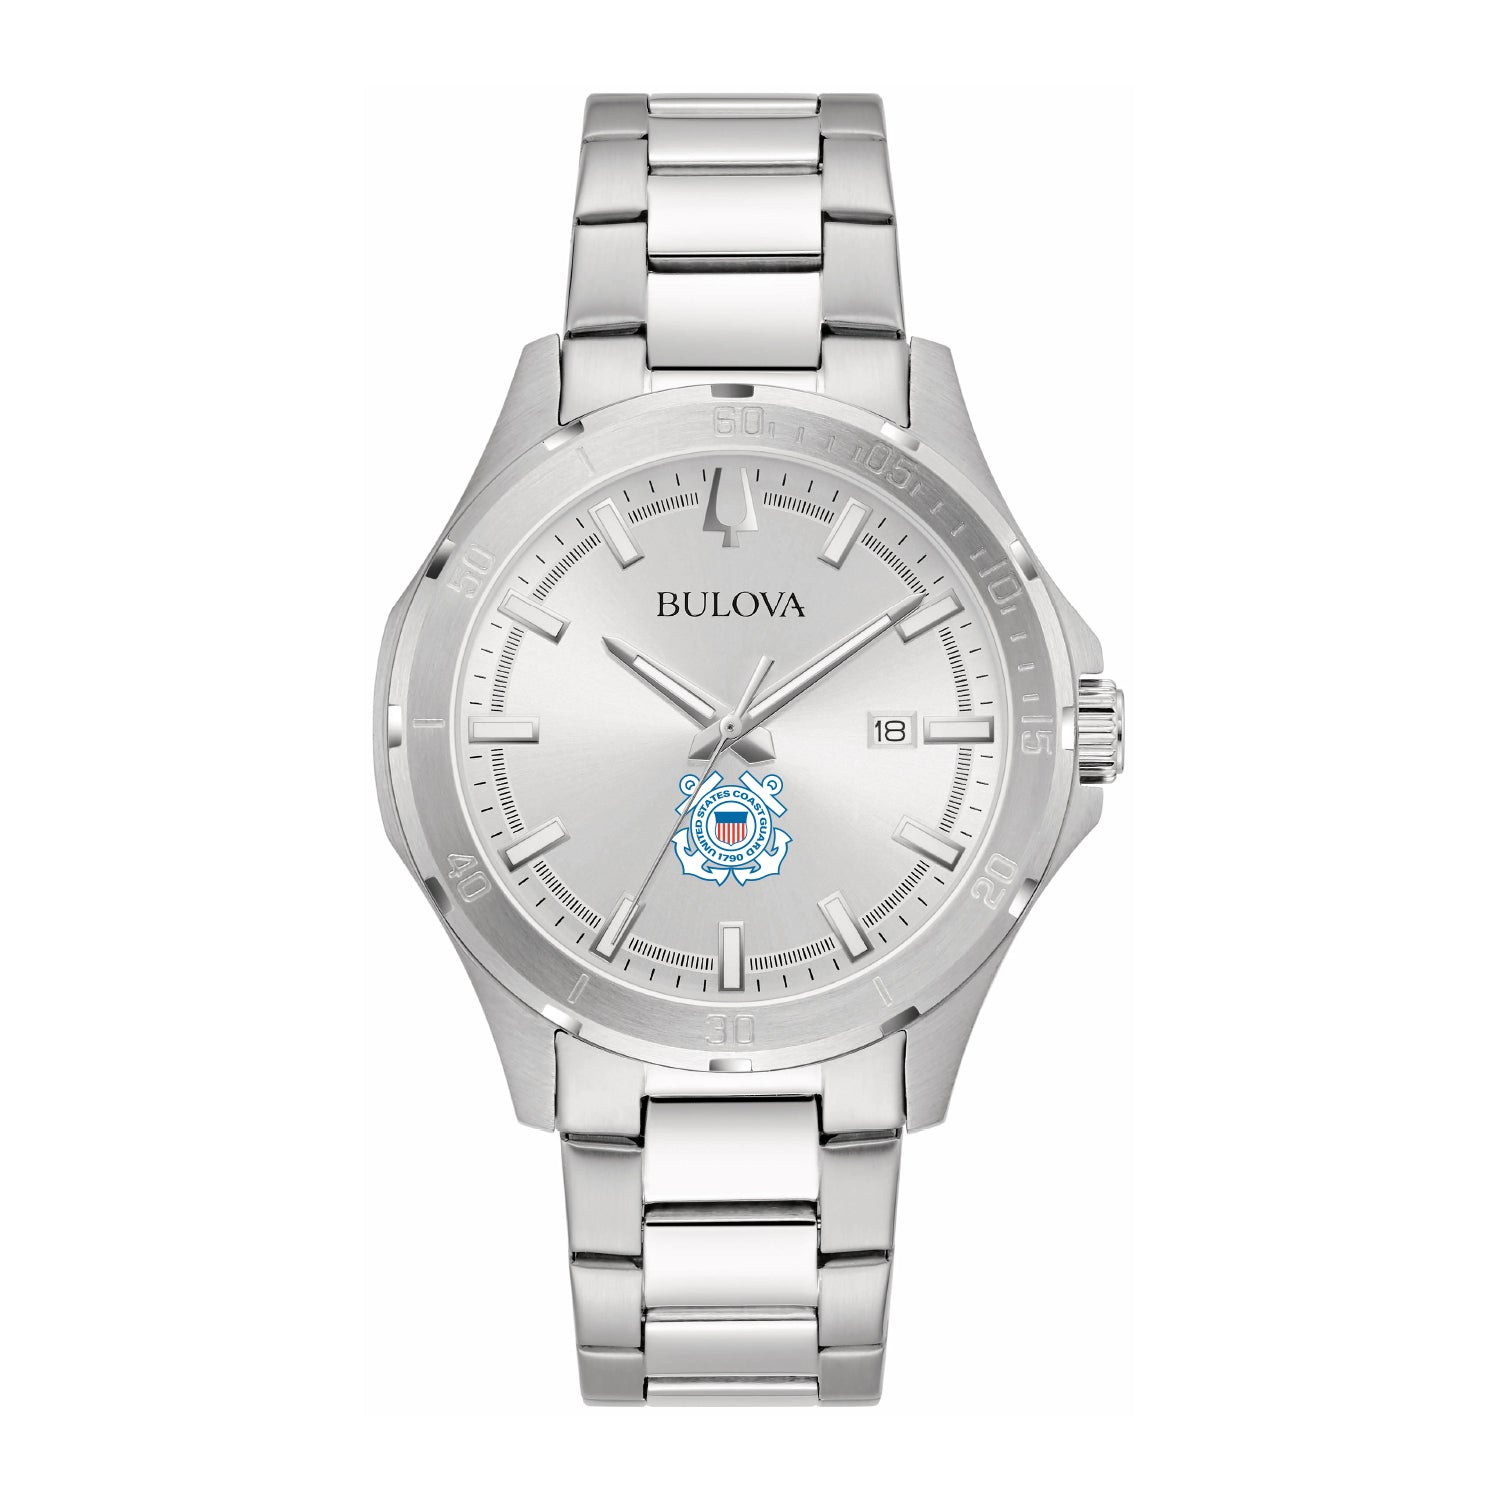 Coast Guard Seal Bulova Men's Sport Classic Stainless Steel Watch (Silver White Dial)